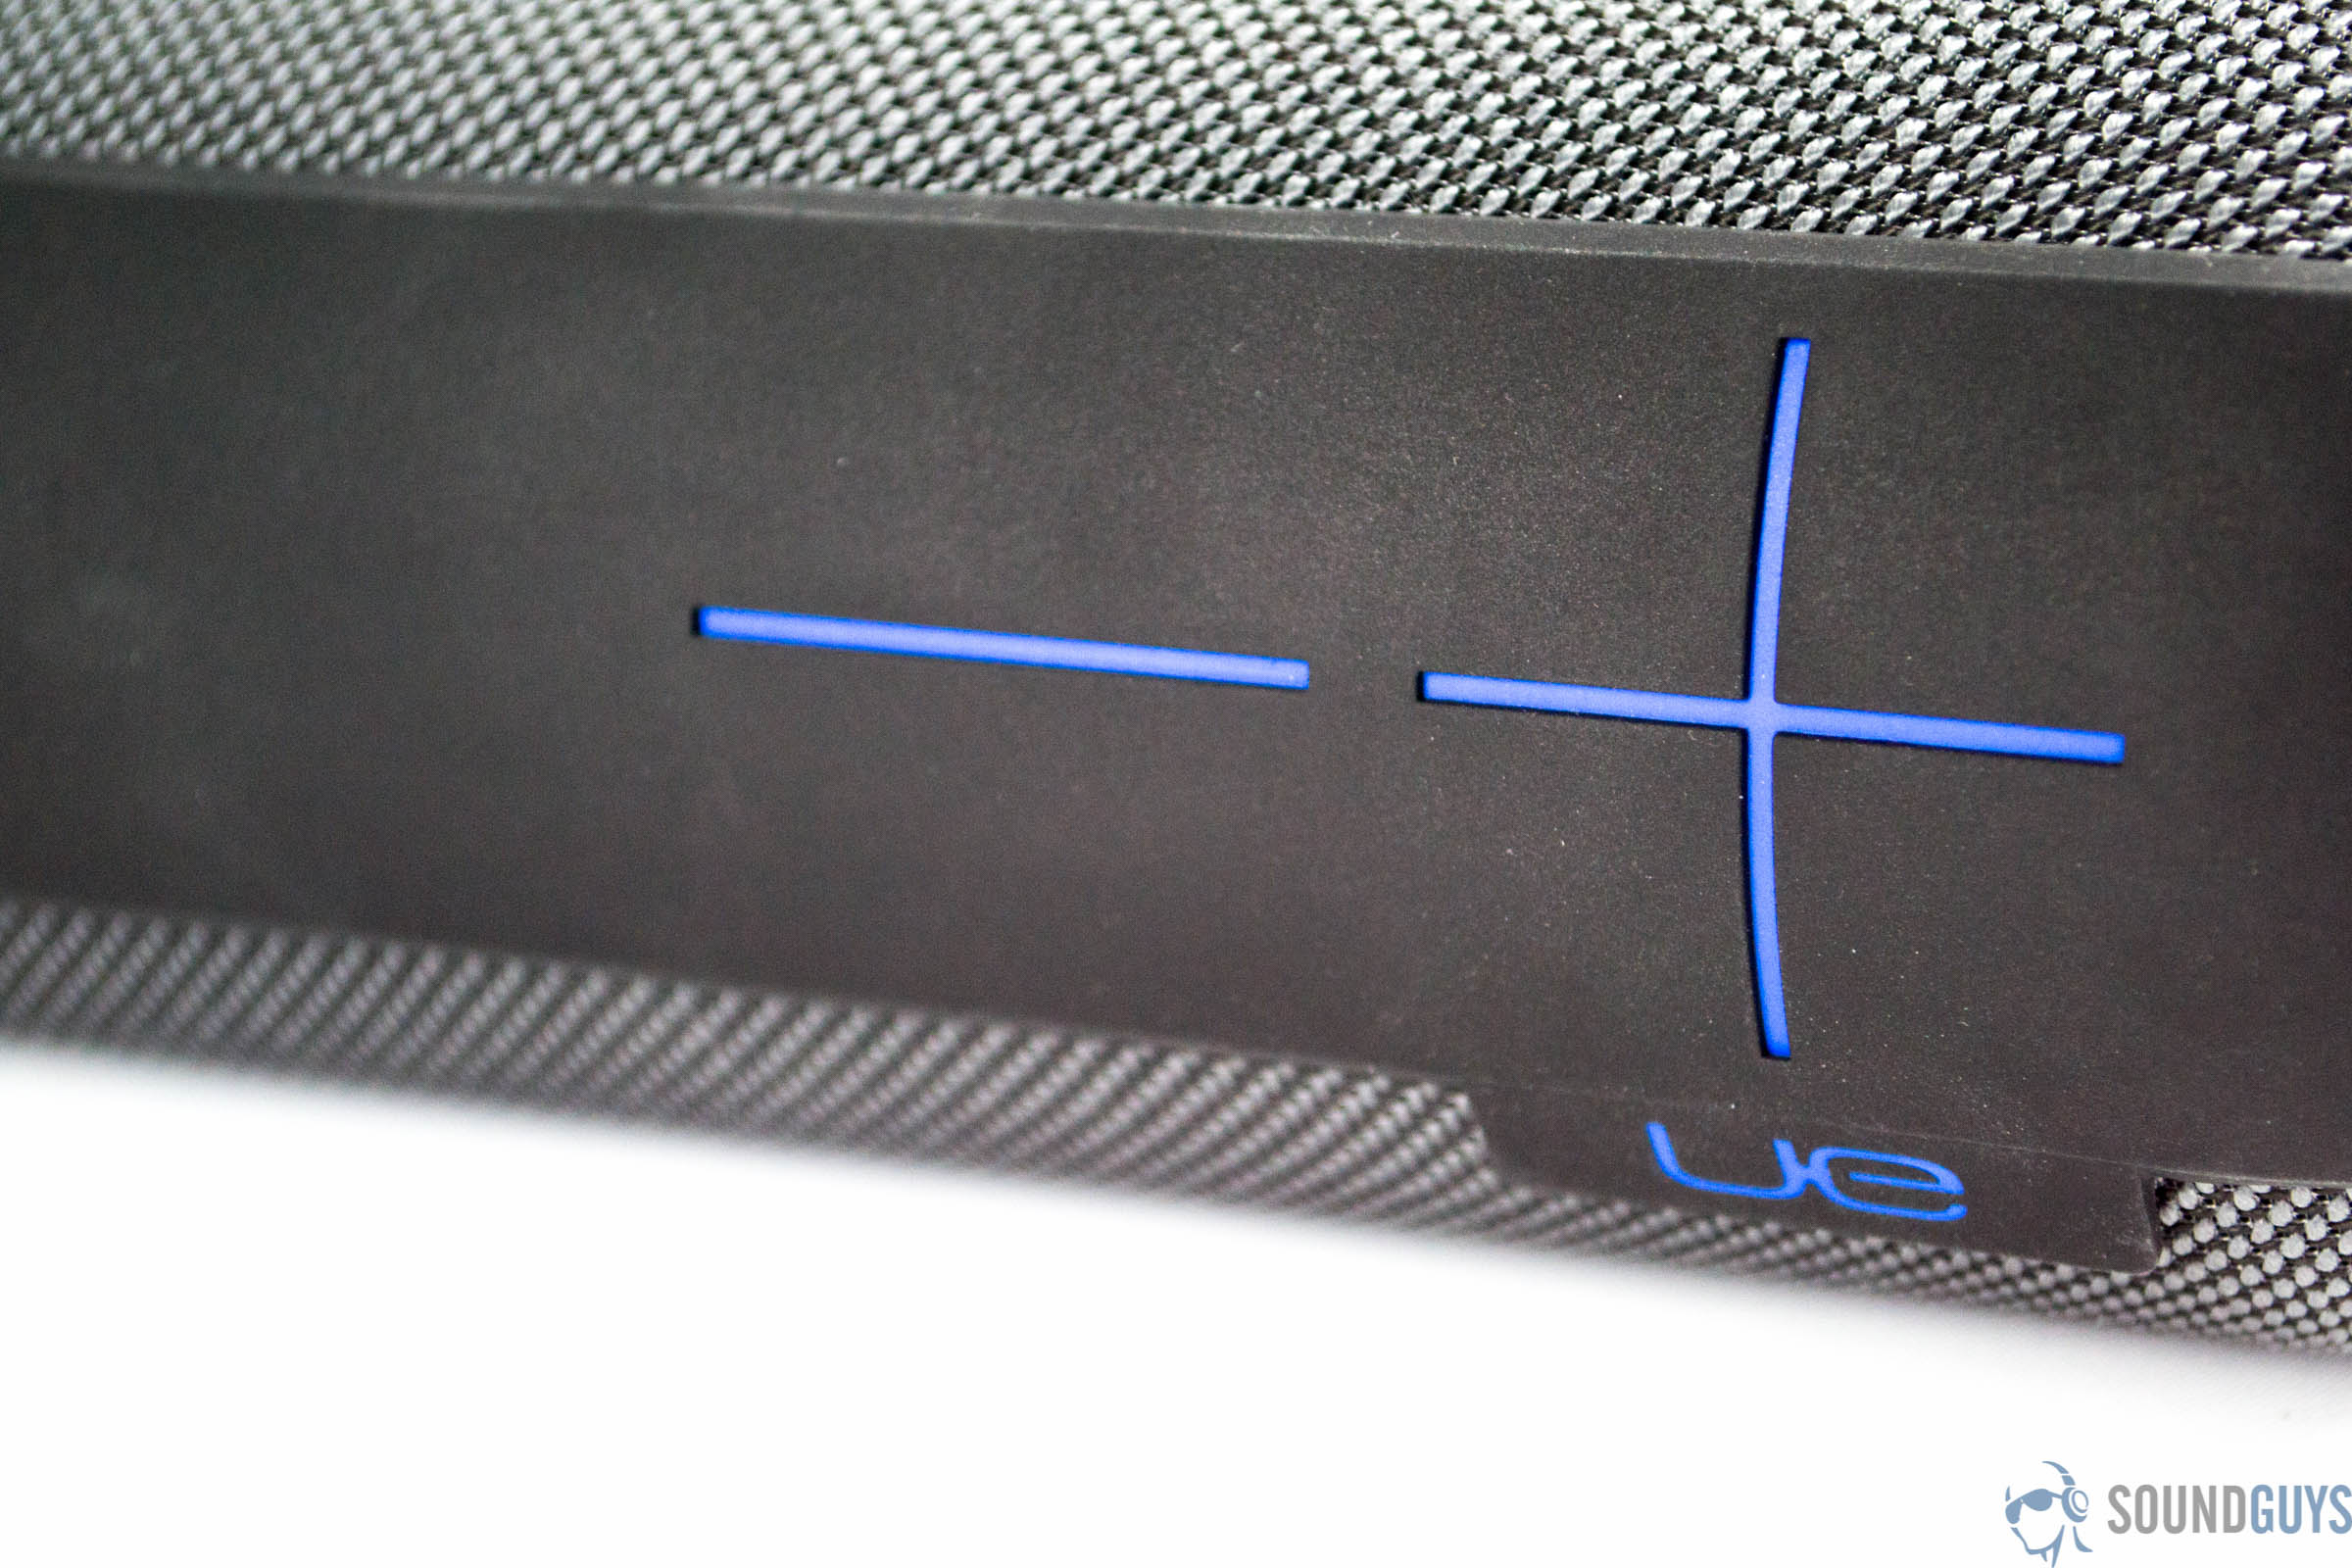 A picture of the UE Megaboom 3 Bluetooth speaker button controls, plus and minus.